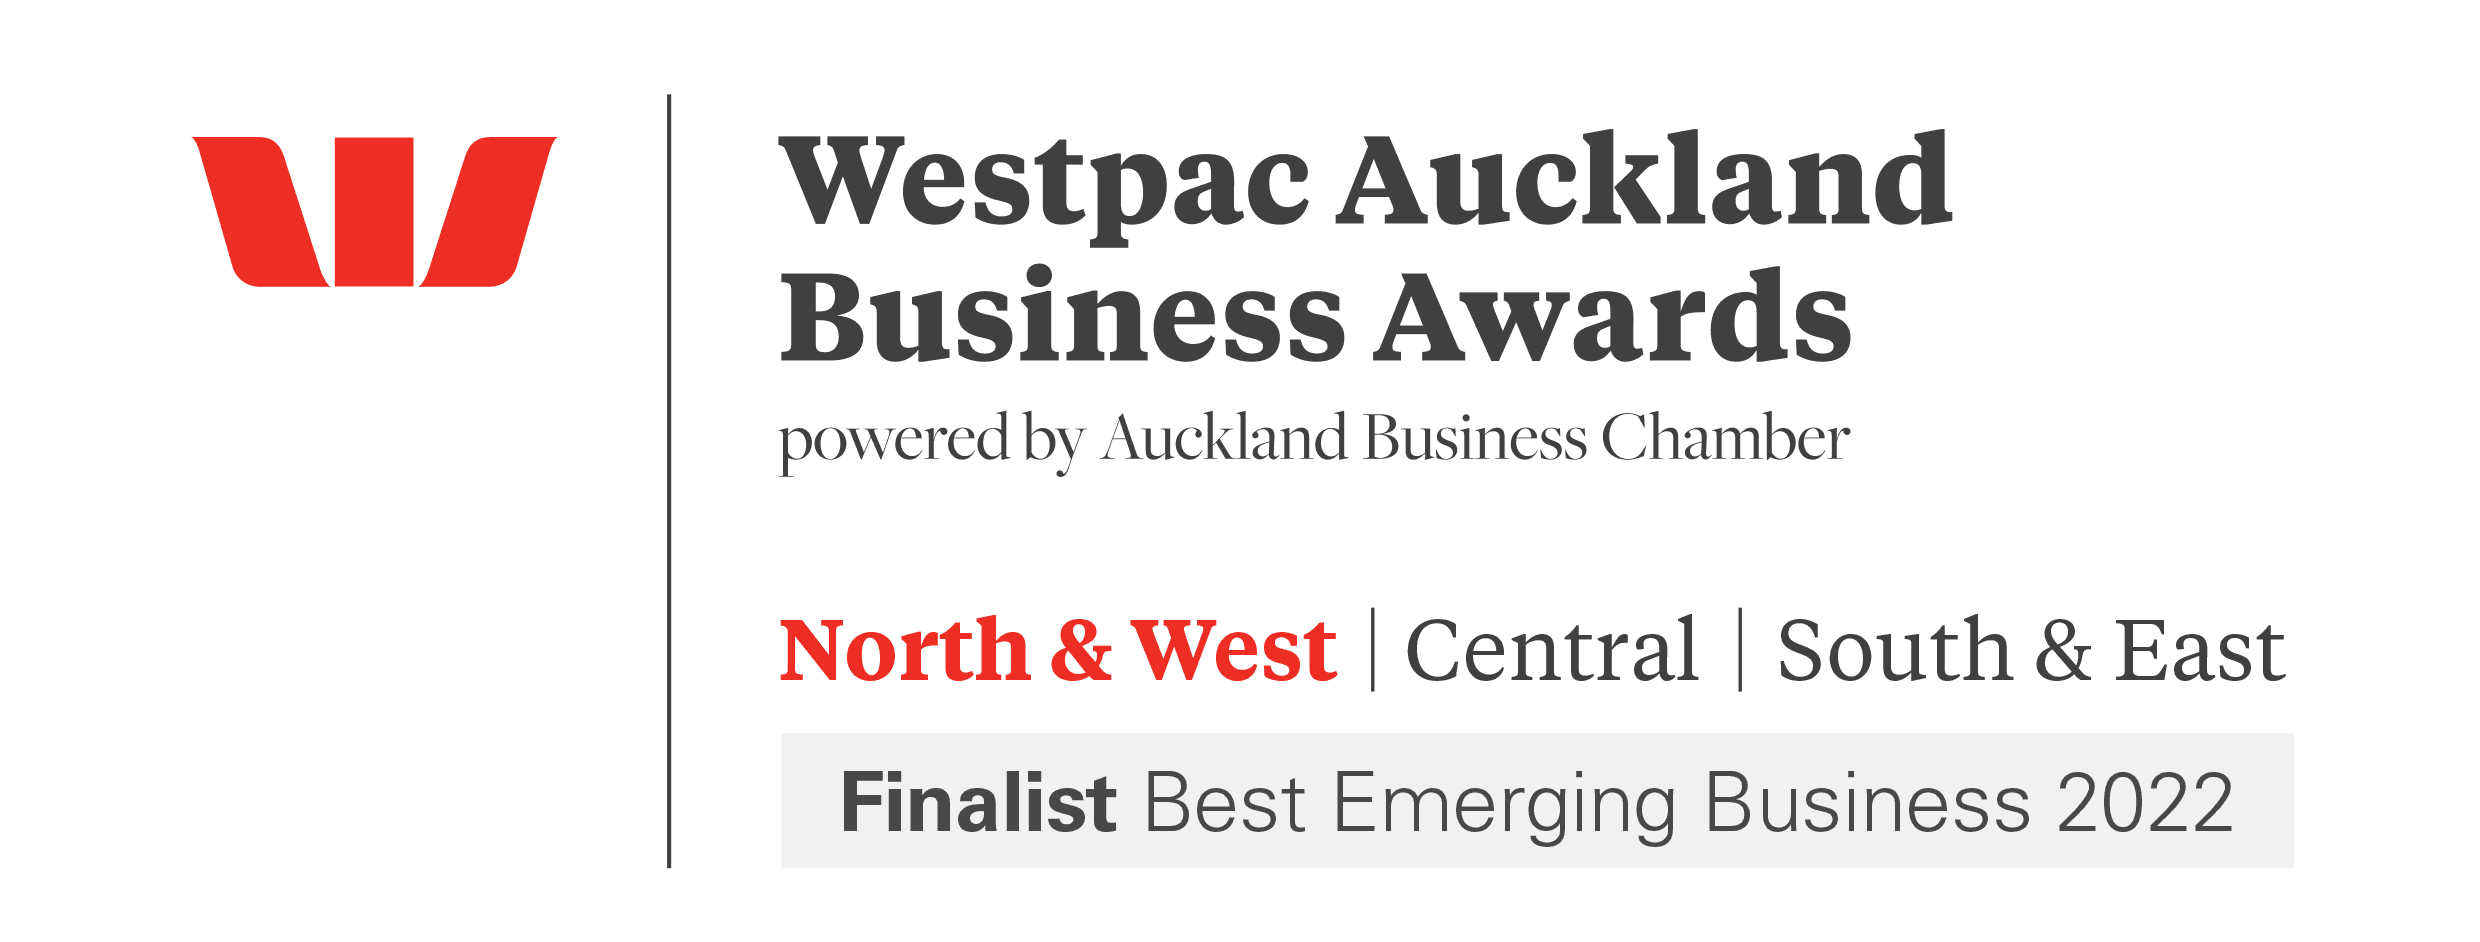 Four Words as a Finalist for Best Emerging Business 2022 at Westpac Auckland Business Awards